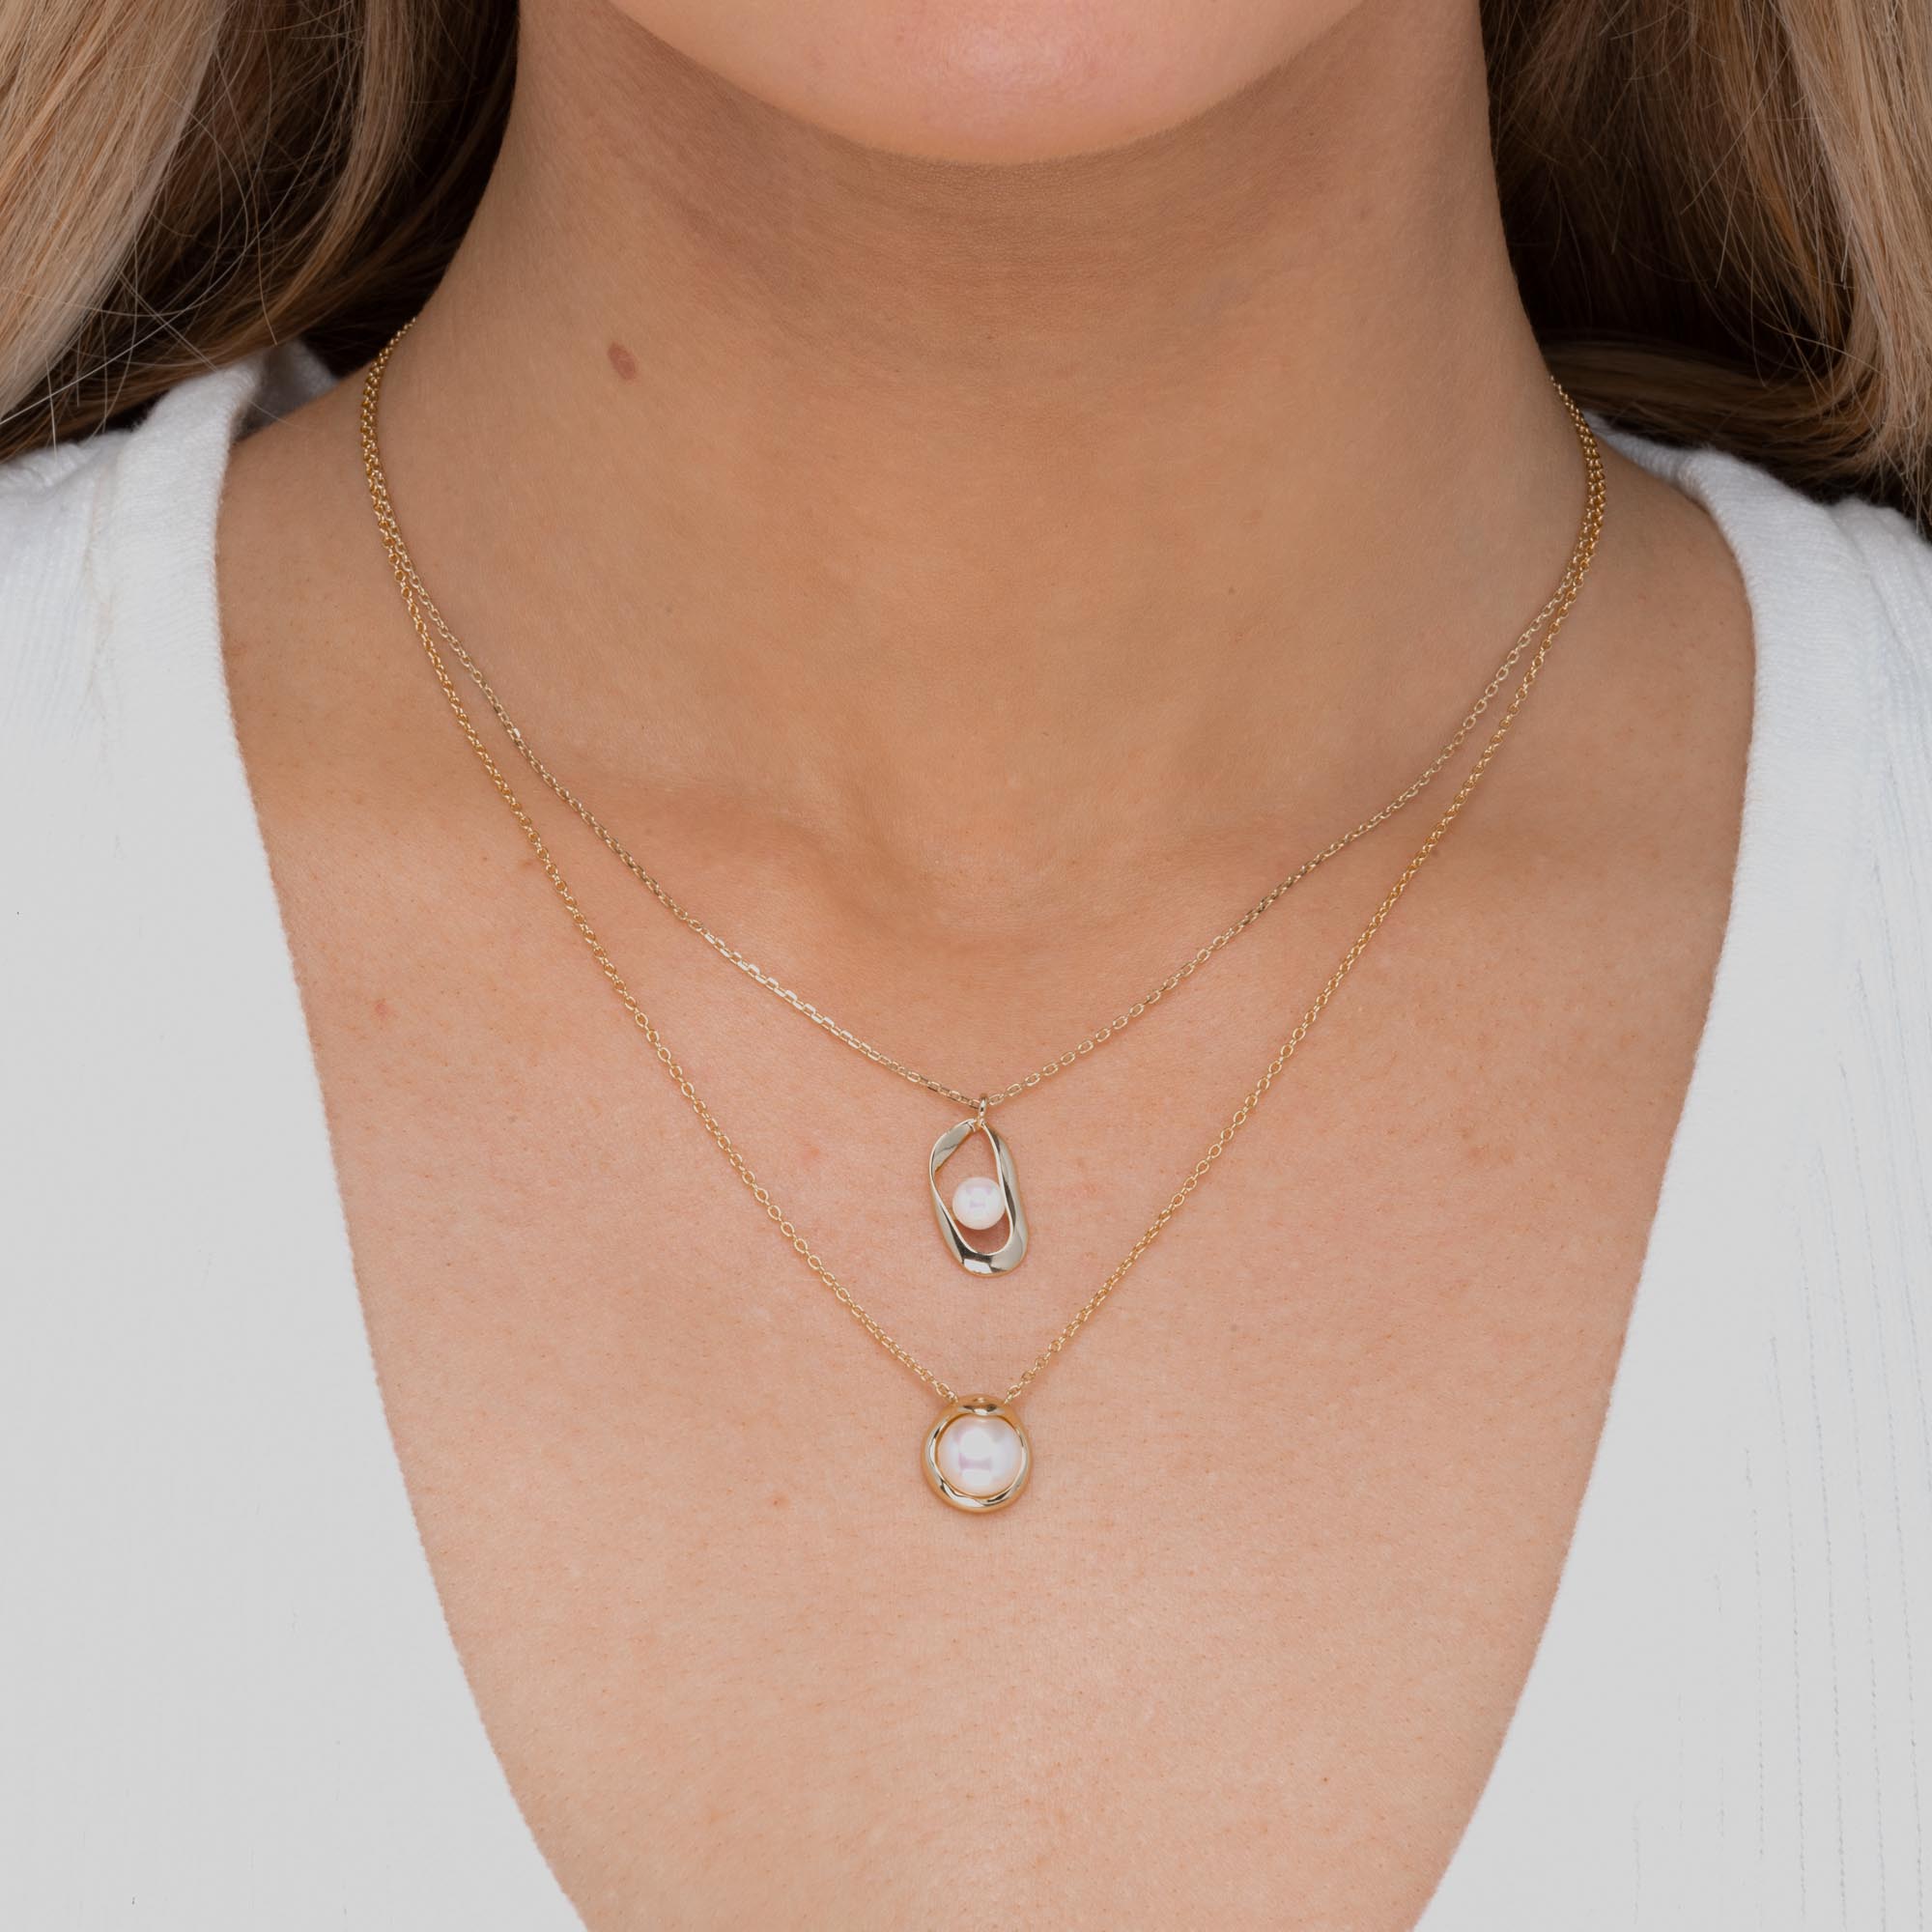 Mabe Pearl Necklace